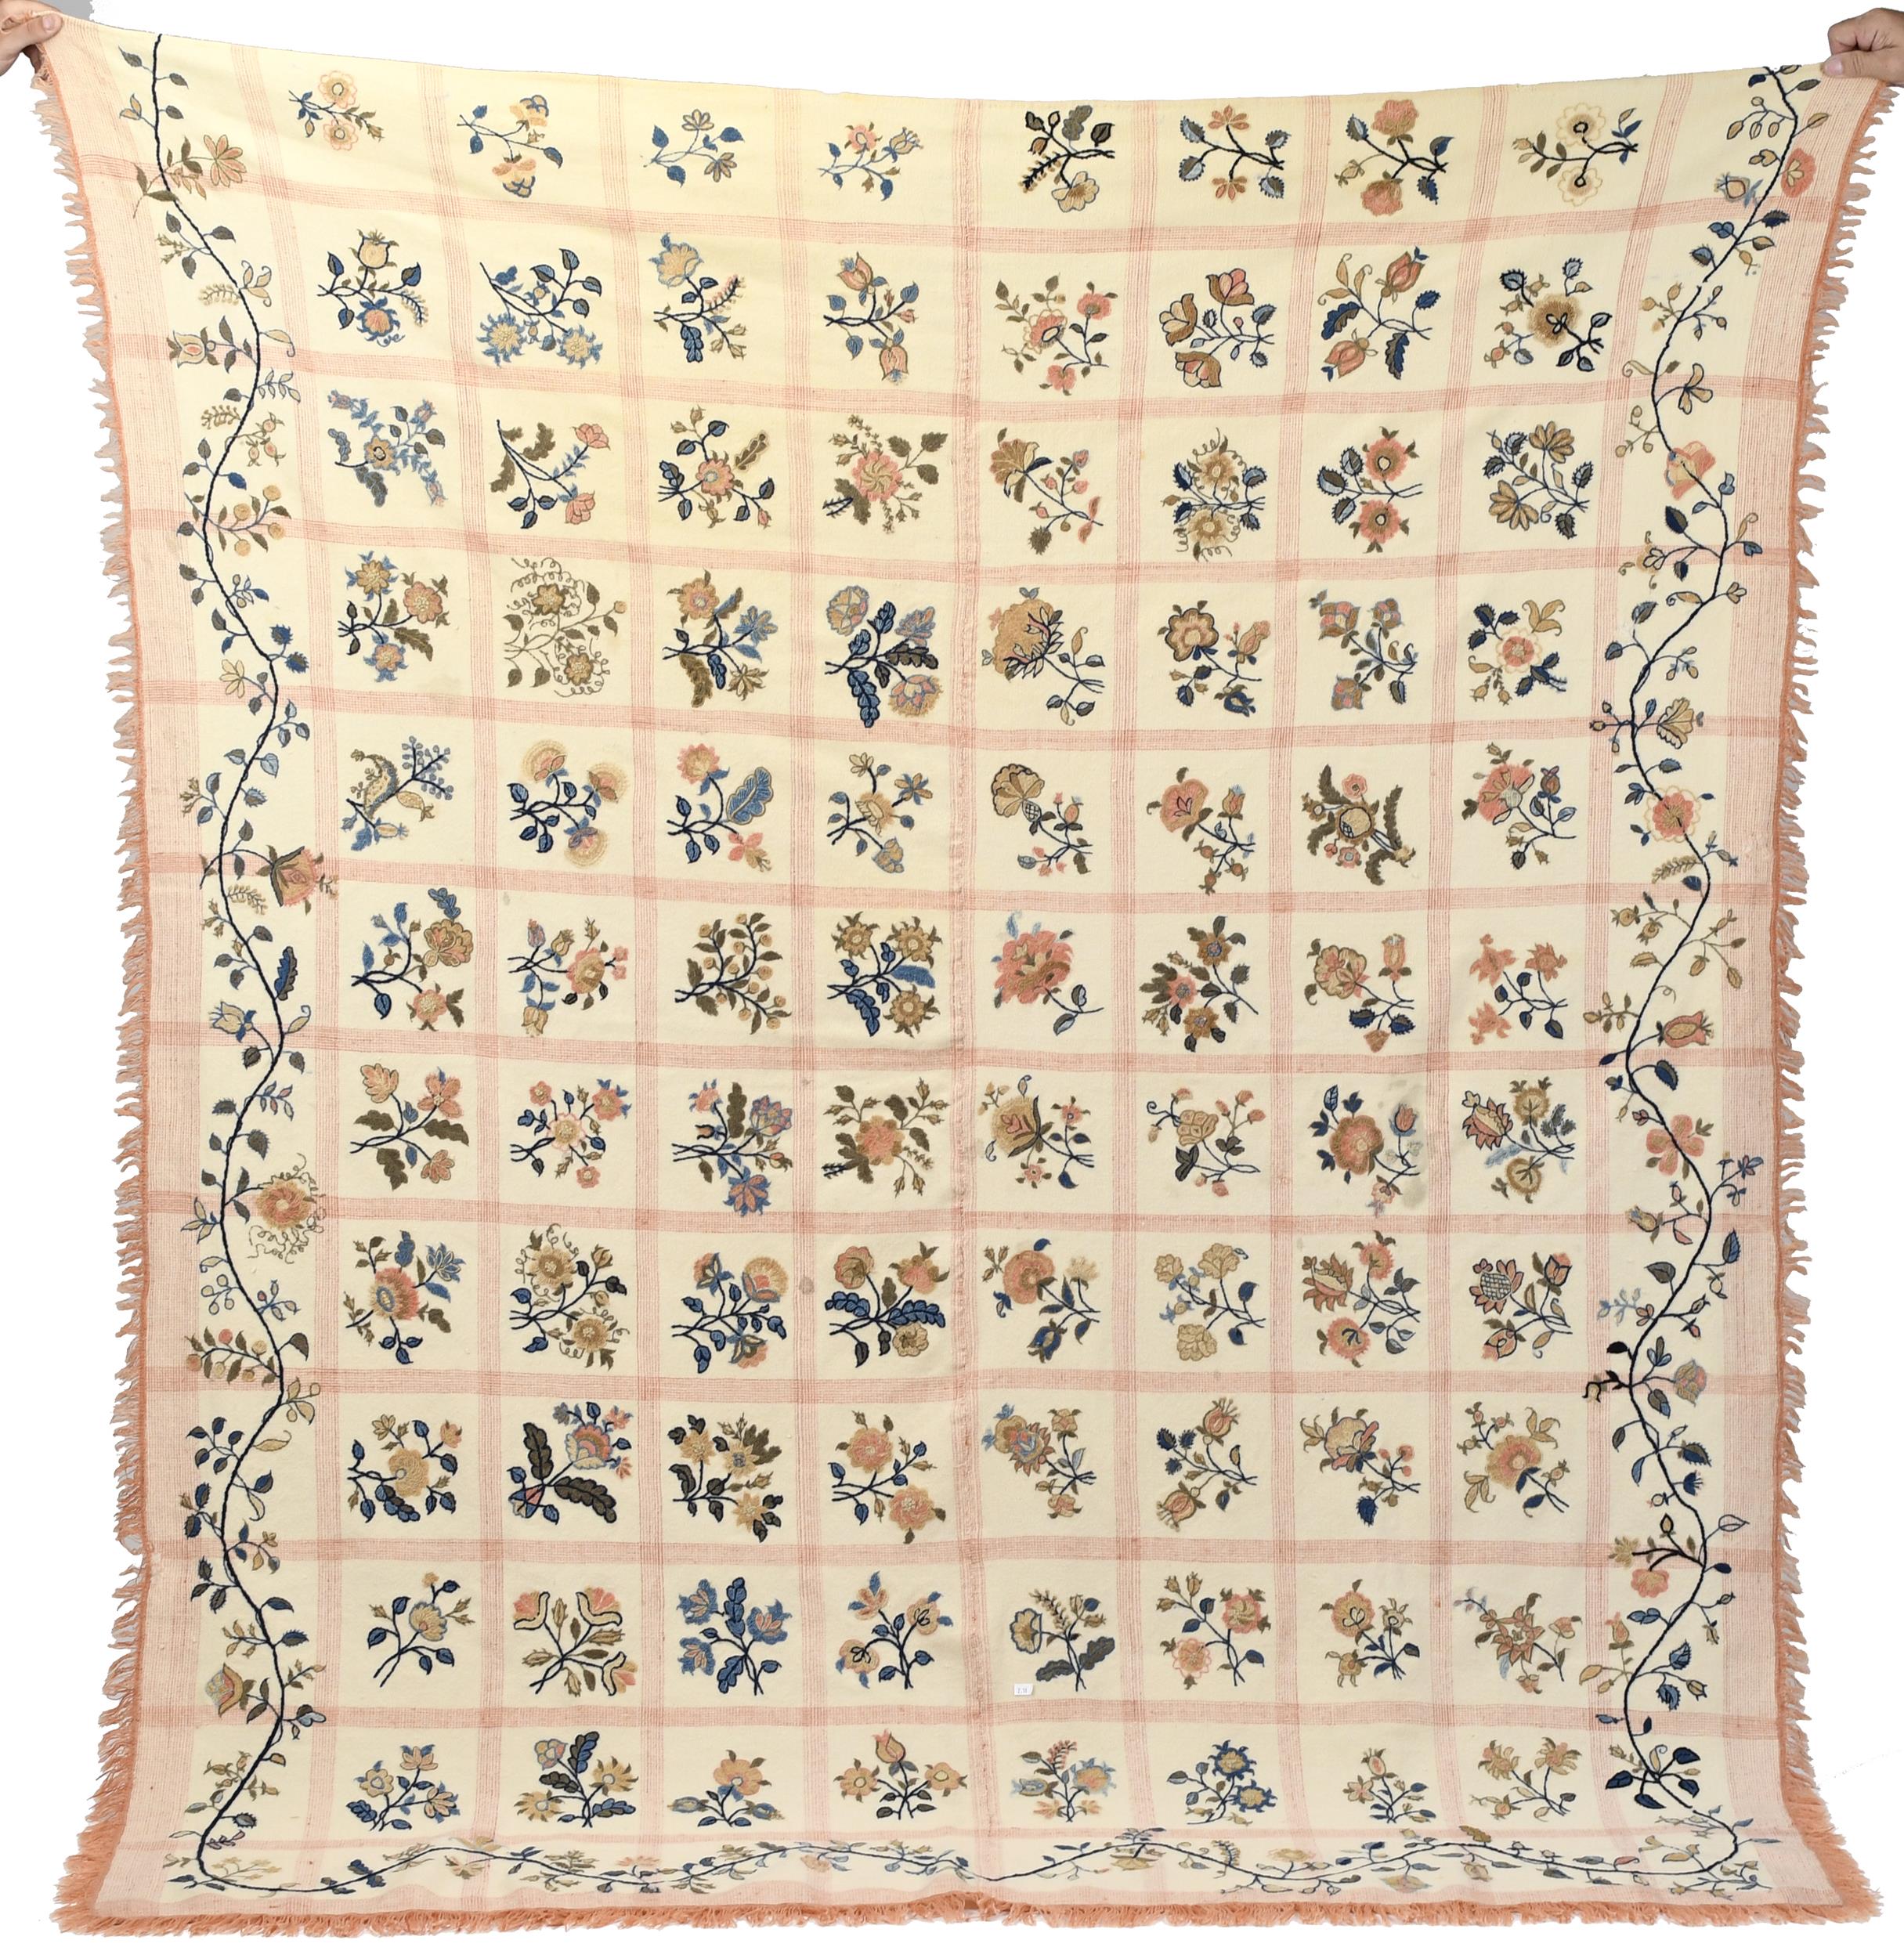 19TH C POLYCHROME HAND EMBROIDERED 3077b2